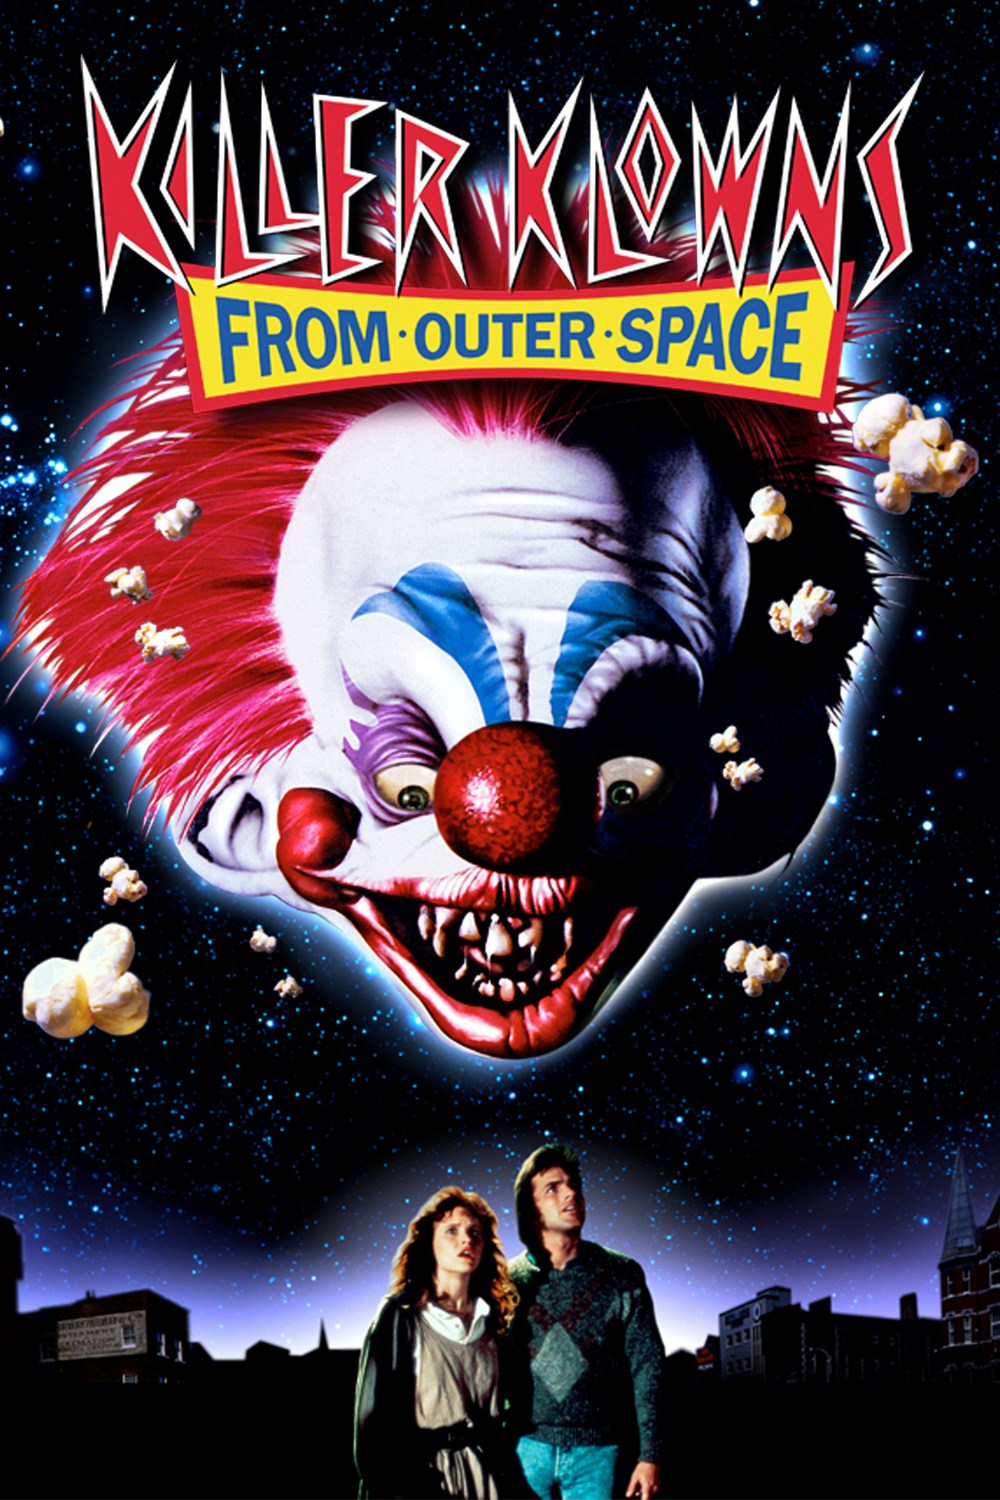 killer klowns from outer space 2 - The Return of the Killer Klowns from Outer Space Killer Klowns Wiki 